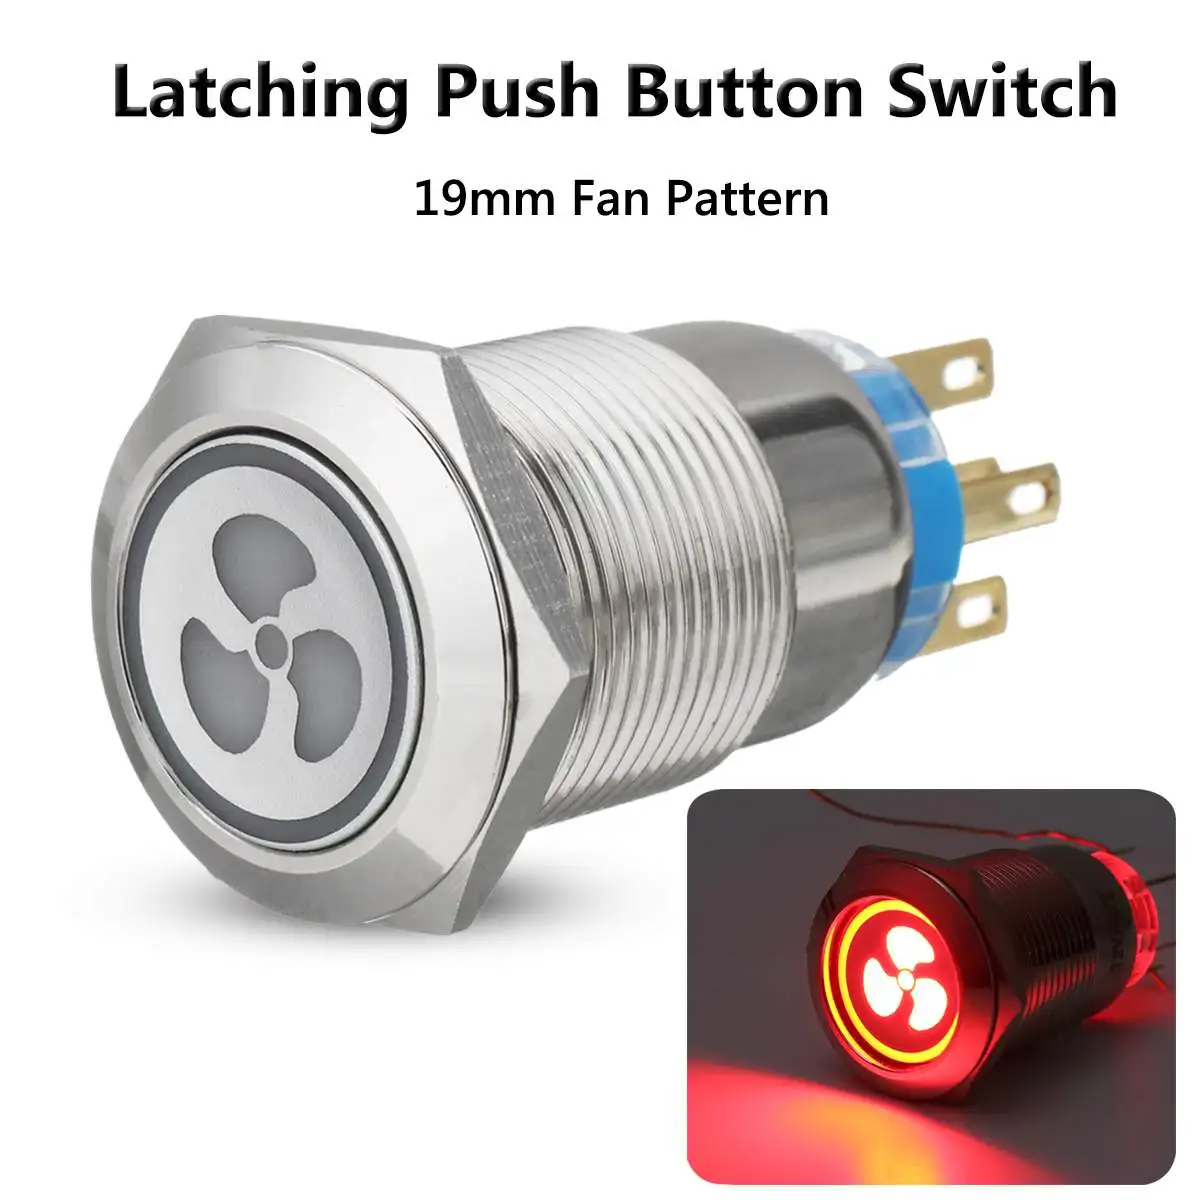 19mm LED Push Button Switch 12V Self-Lock Panel Fan Switch For Car Truck Lorry Boat - Color: Red